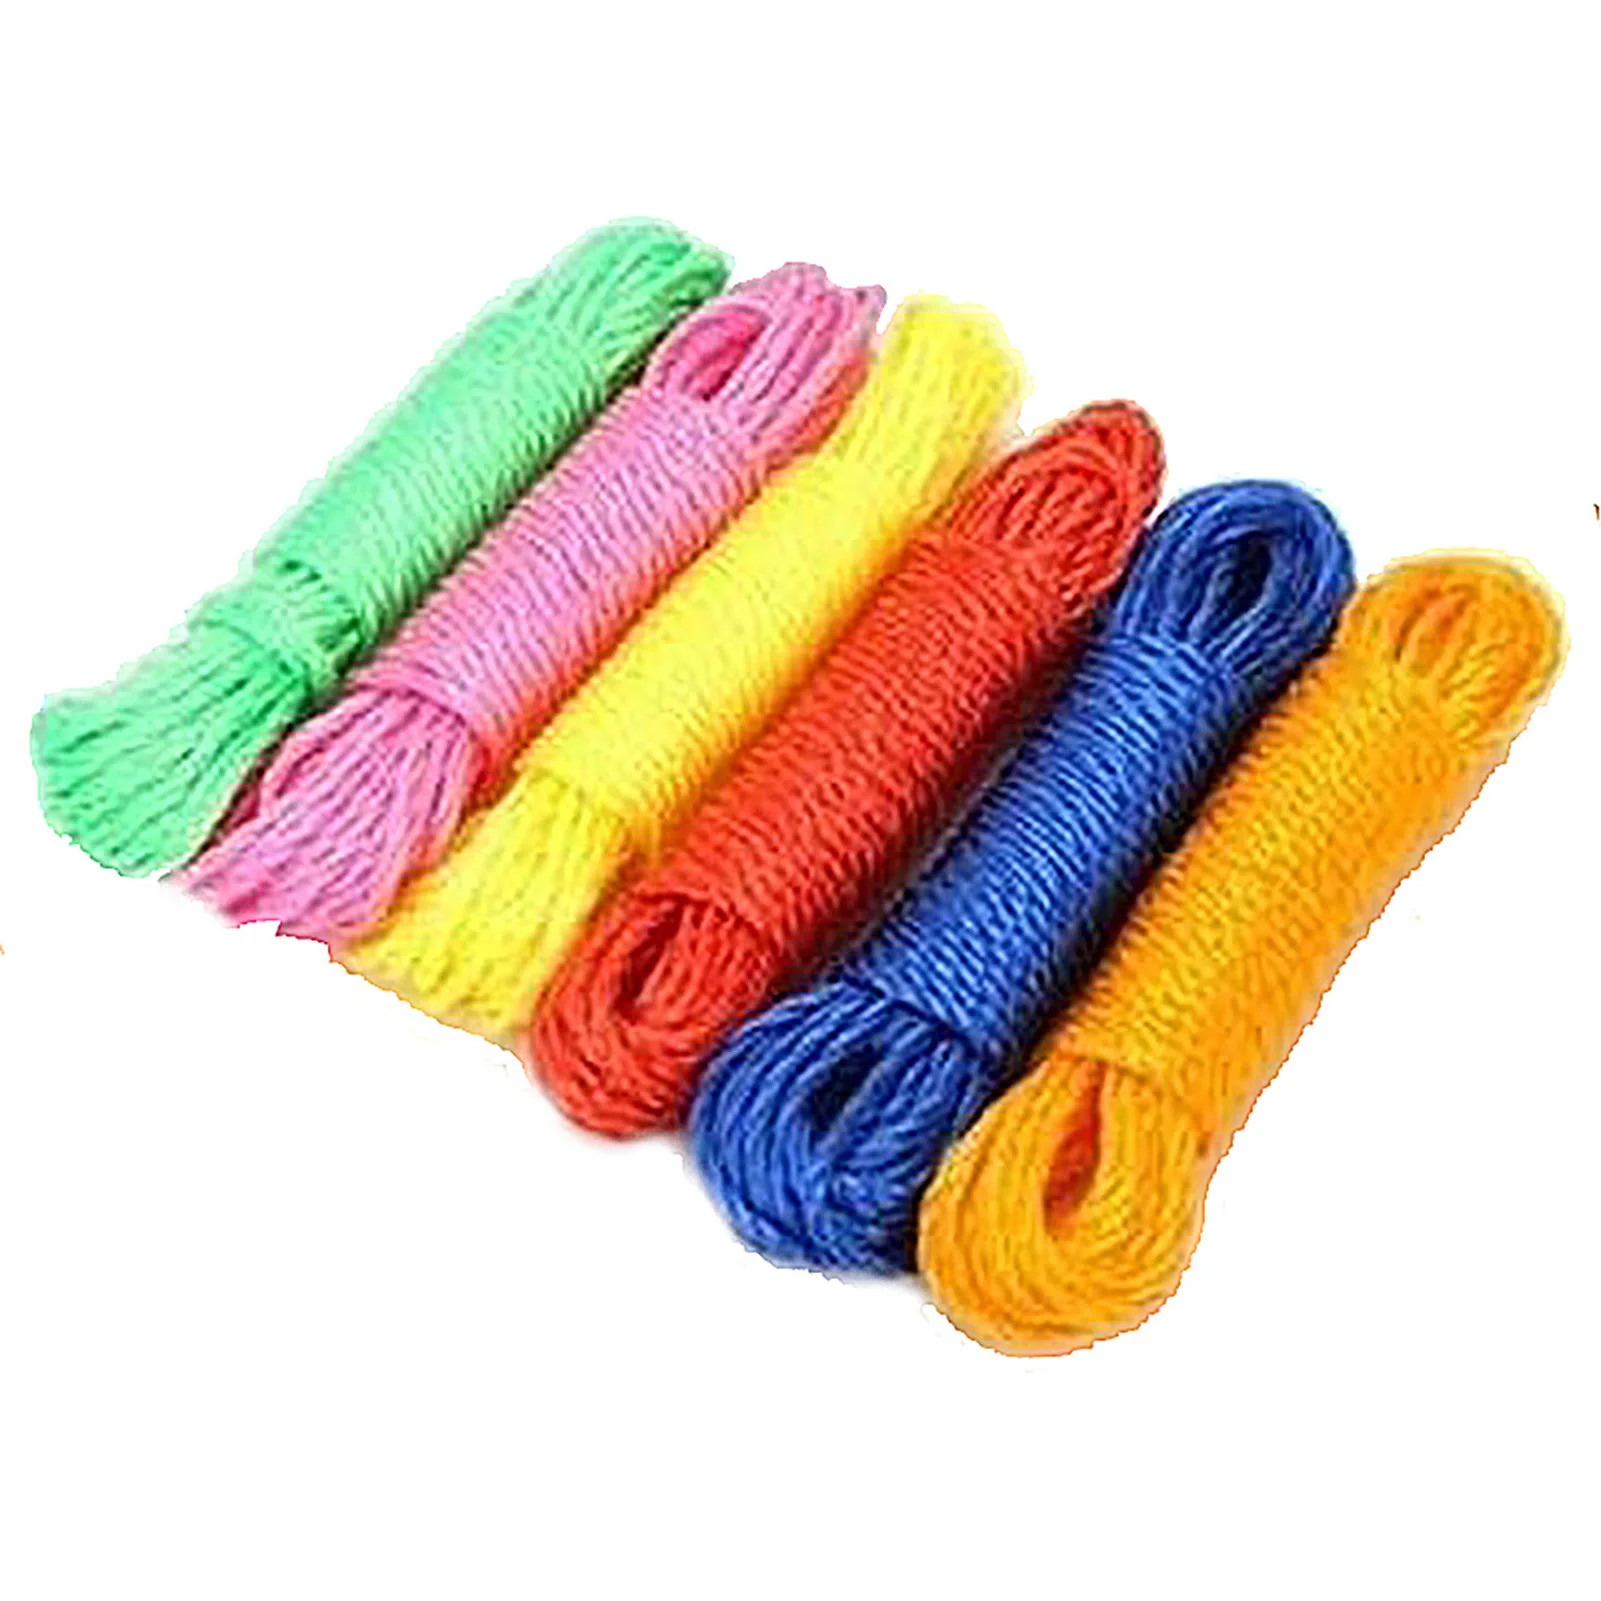 

10m Clotheslines Hanging Rope Bright Color Laundry Drying Clothesline Rope Suitable for Home Hotel Dorm